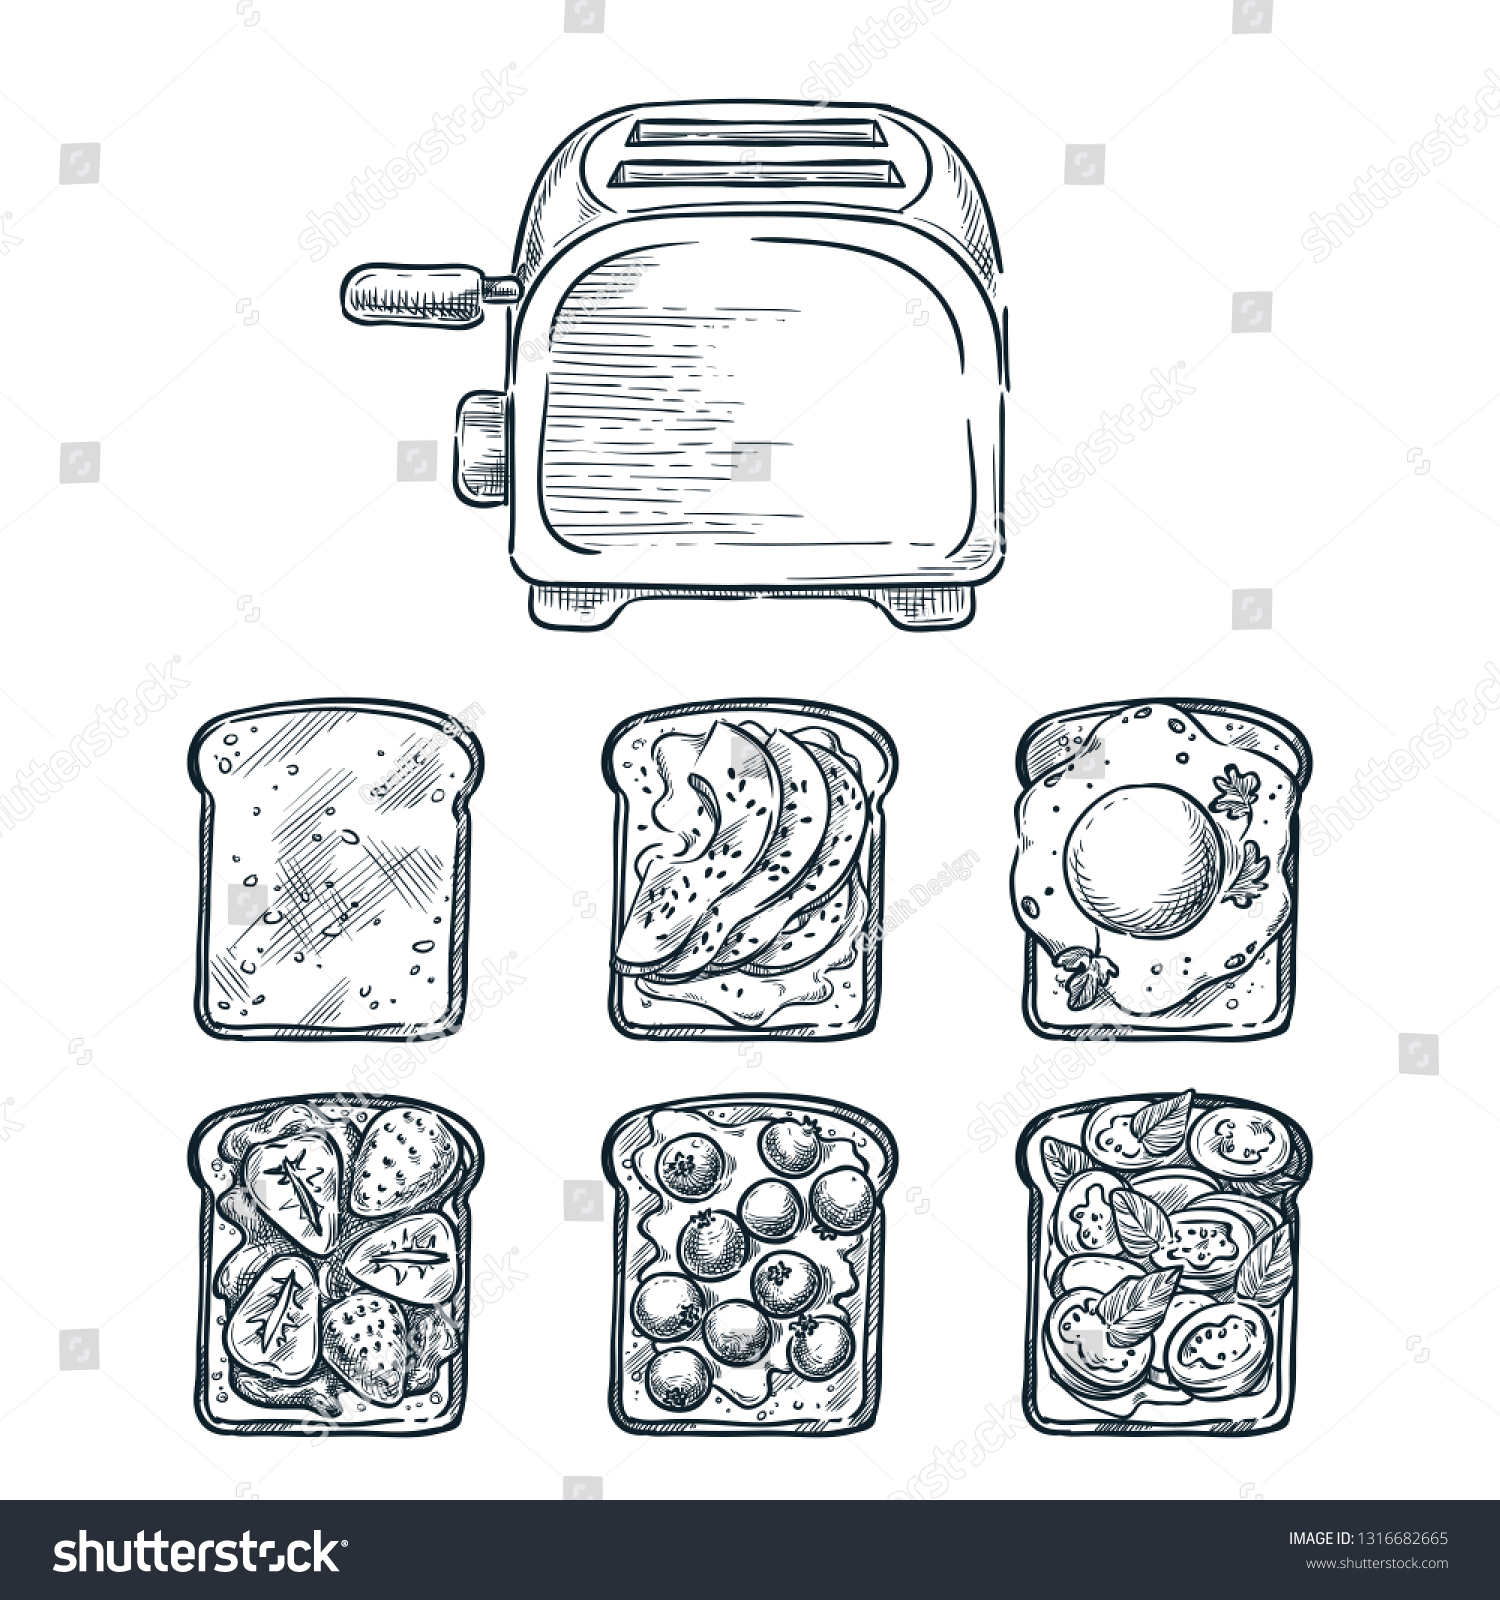 SVG of Toaster and various toppers on toasted bread. Cooking breakfast, vector sketch illustration. Recipes and ingredients for delicious toast toppings. Restaurant or cafe brunch menu design elements. svg